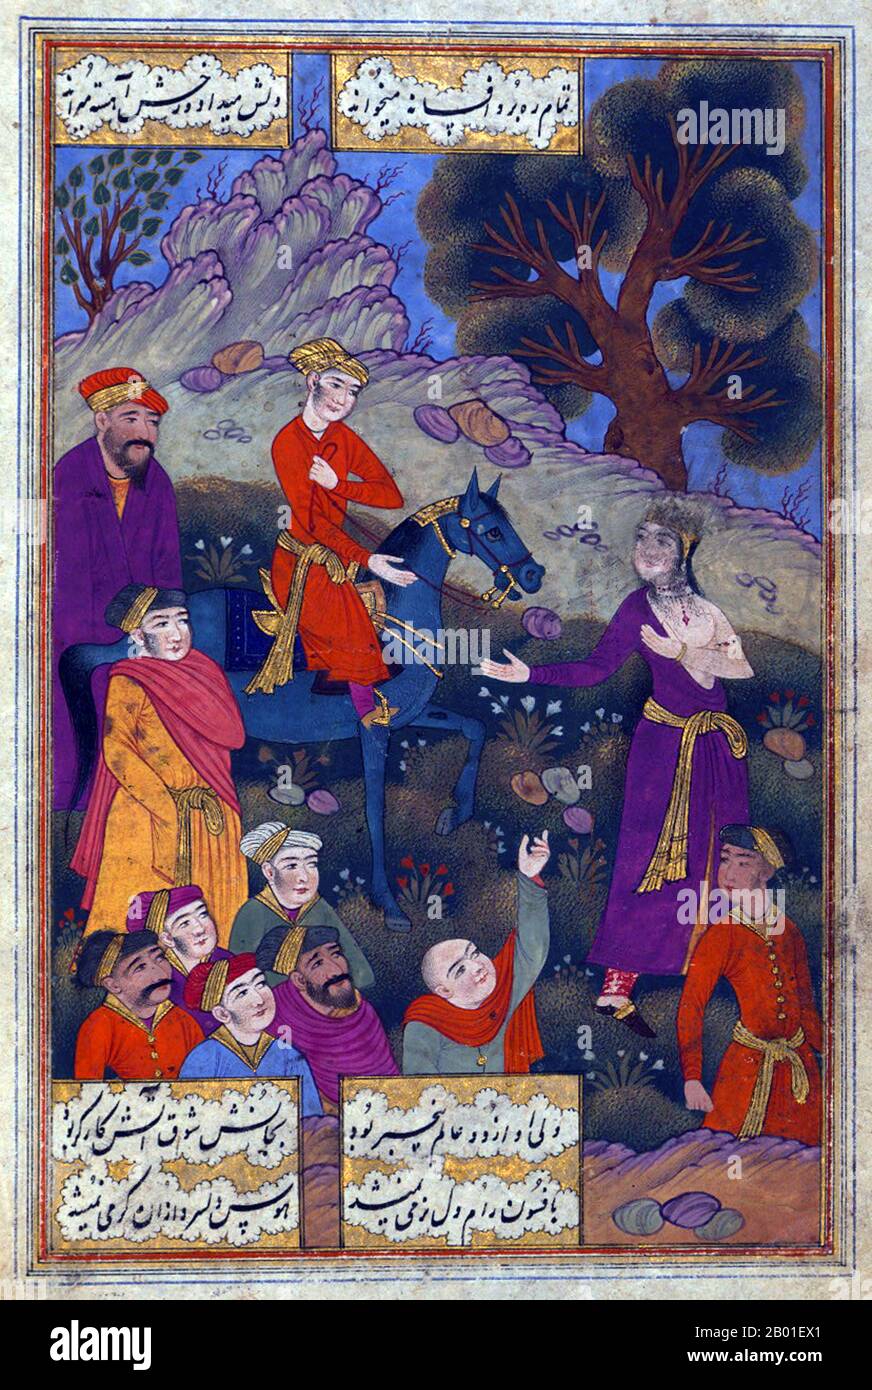 India: Prince Daniyal Accompanies the Young Hindu Girl to the Funeral Pyre. From the illuminated manuscript poem Sūz va gudāz ('Burning and melting') by Muhammad Riza Naw'i Khabushani (1563–1610). c. 1657.  Akbar  (25 October 1542 - 27 October 1605), also known as Shahanshah Akbar-e-Azam or Akbar the Great, was the third Mughal Emperor. He was of Timurid descent; the son of Emperor Humayun, and the grandson of Emperor Babur, the ruler who founded the Mughal dynasty in India. At the end of his reign in 1605 the Mughal empire covered most of the northern and central India. Stock Photo